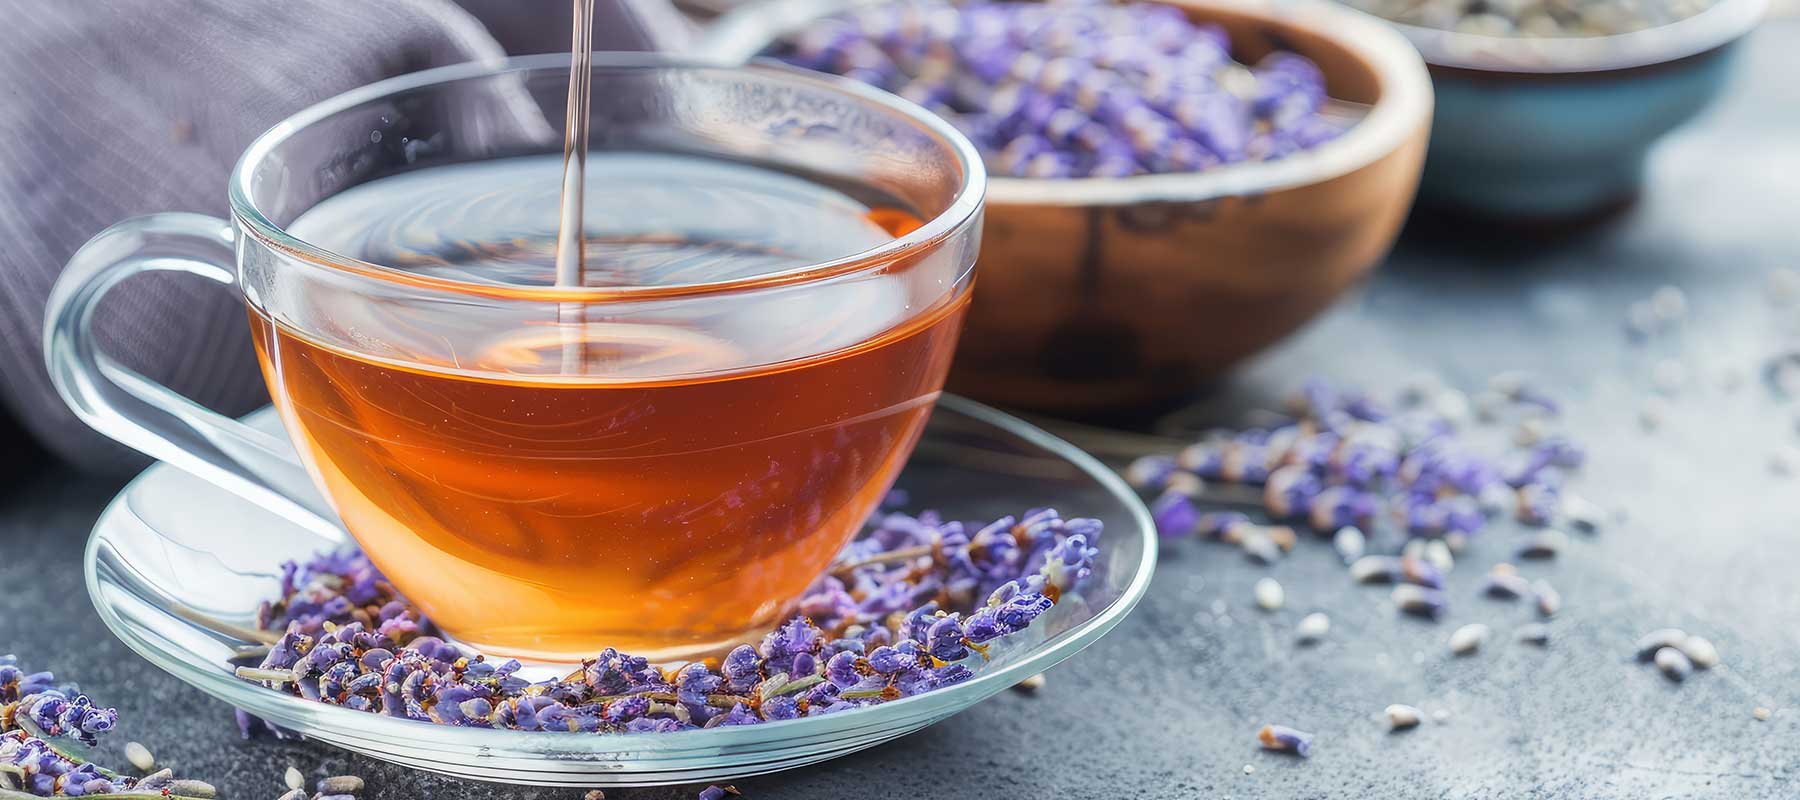 cup of floral tea with lavender